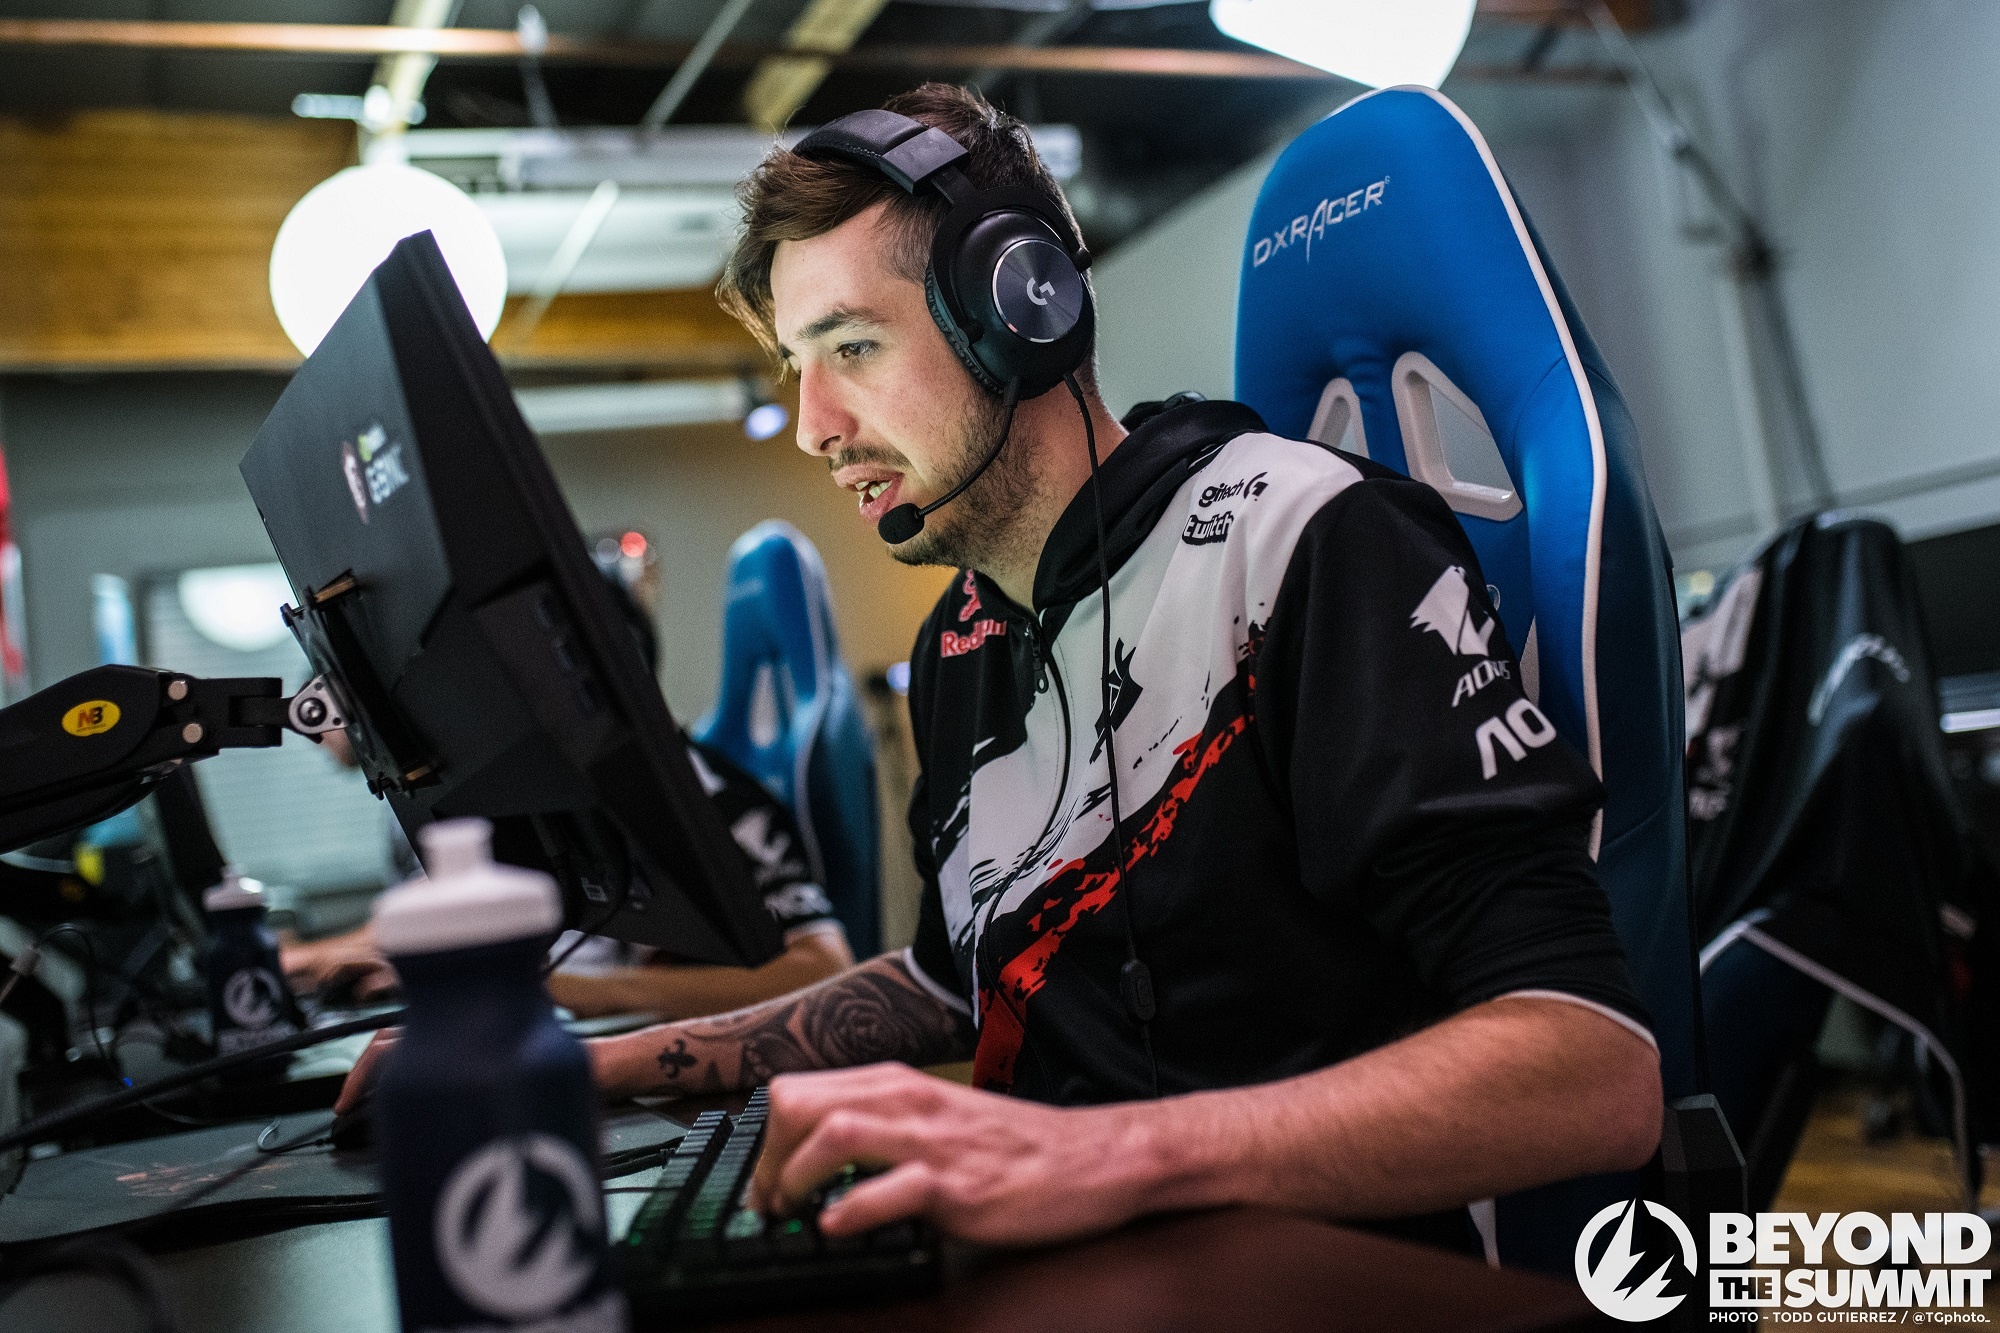 KennyS to VALORANT? Former G2 Esports Player Eyes Riot’s FPS